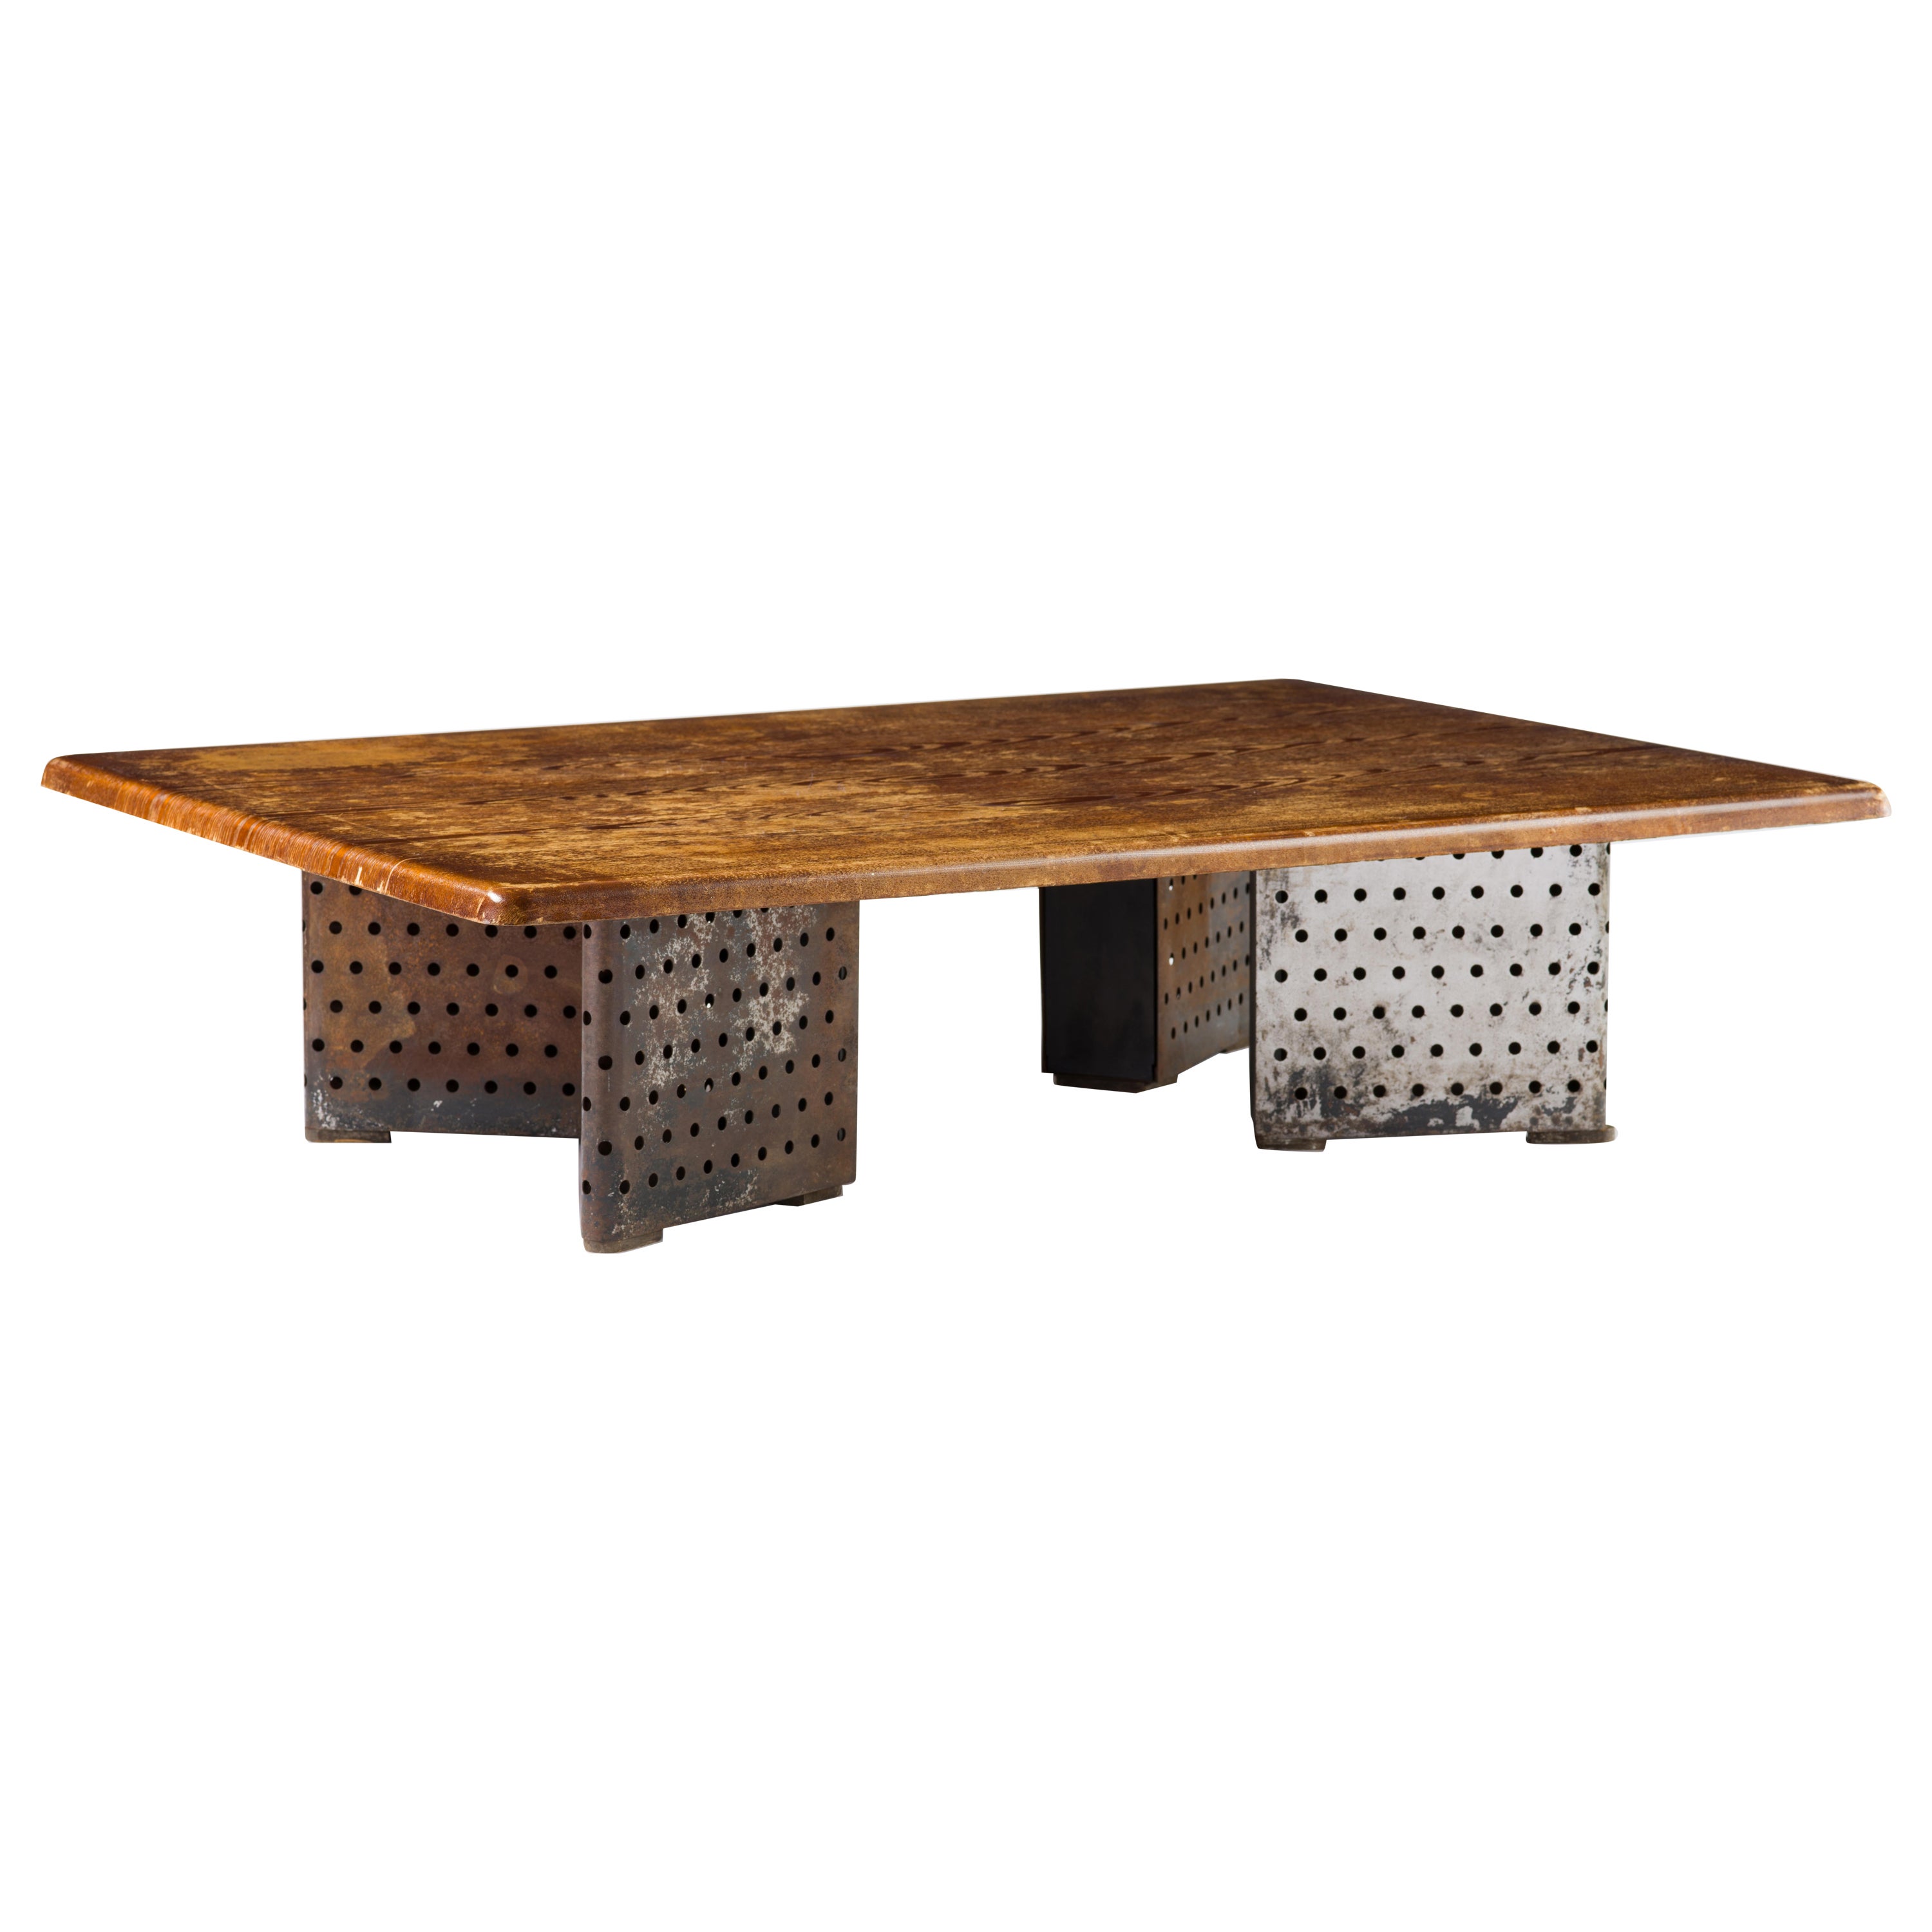 Low French Modernist Table in Oak and Perforated Steel, circa 1955 For Sale